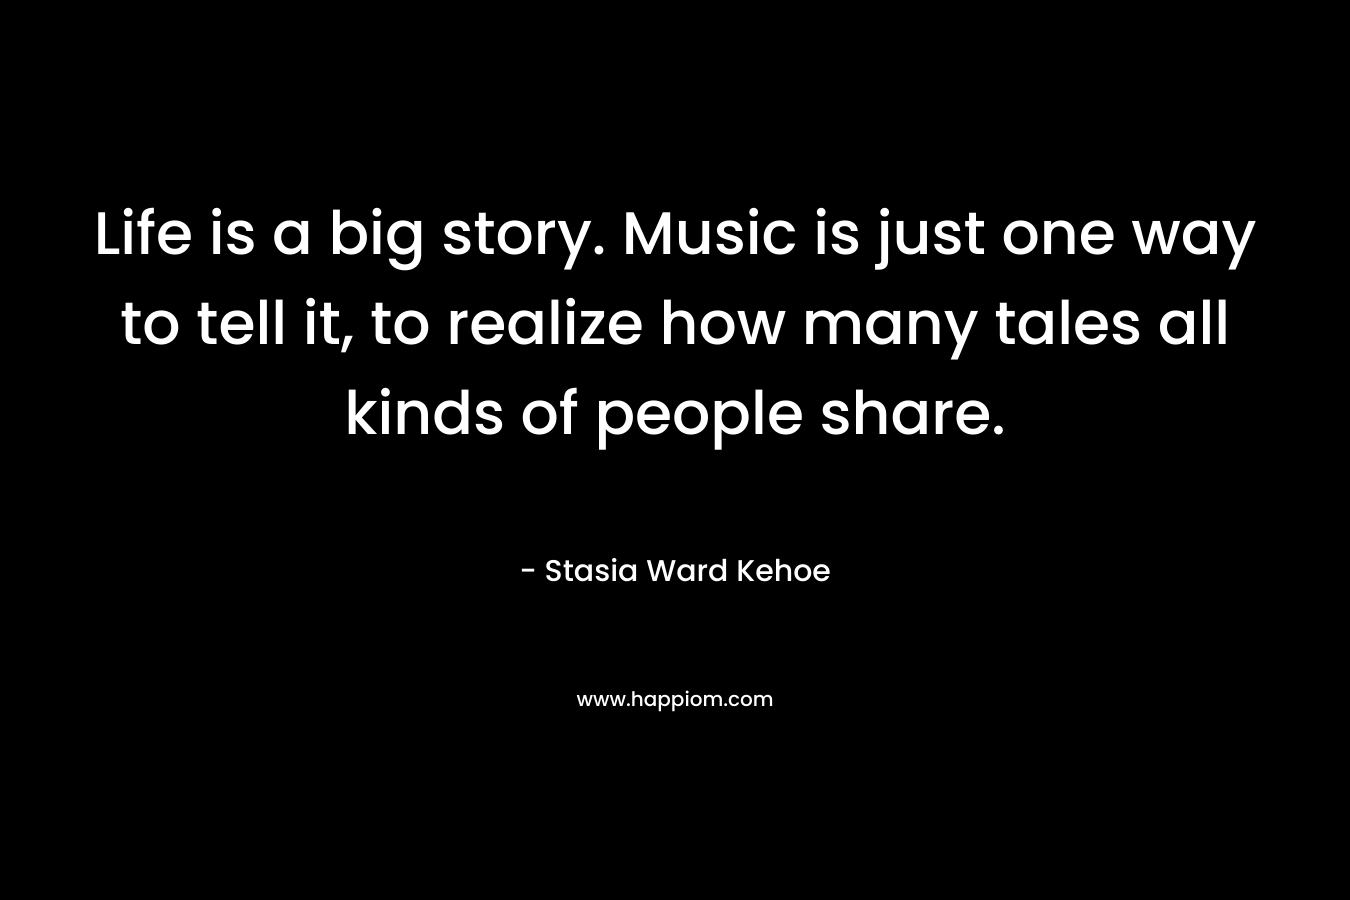 Life is a big story. Music is just one way to tell it, to realize how many tales all kinds of people share. – Stasia Ward Kehoe